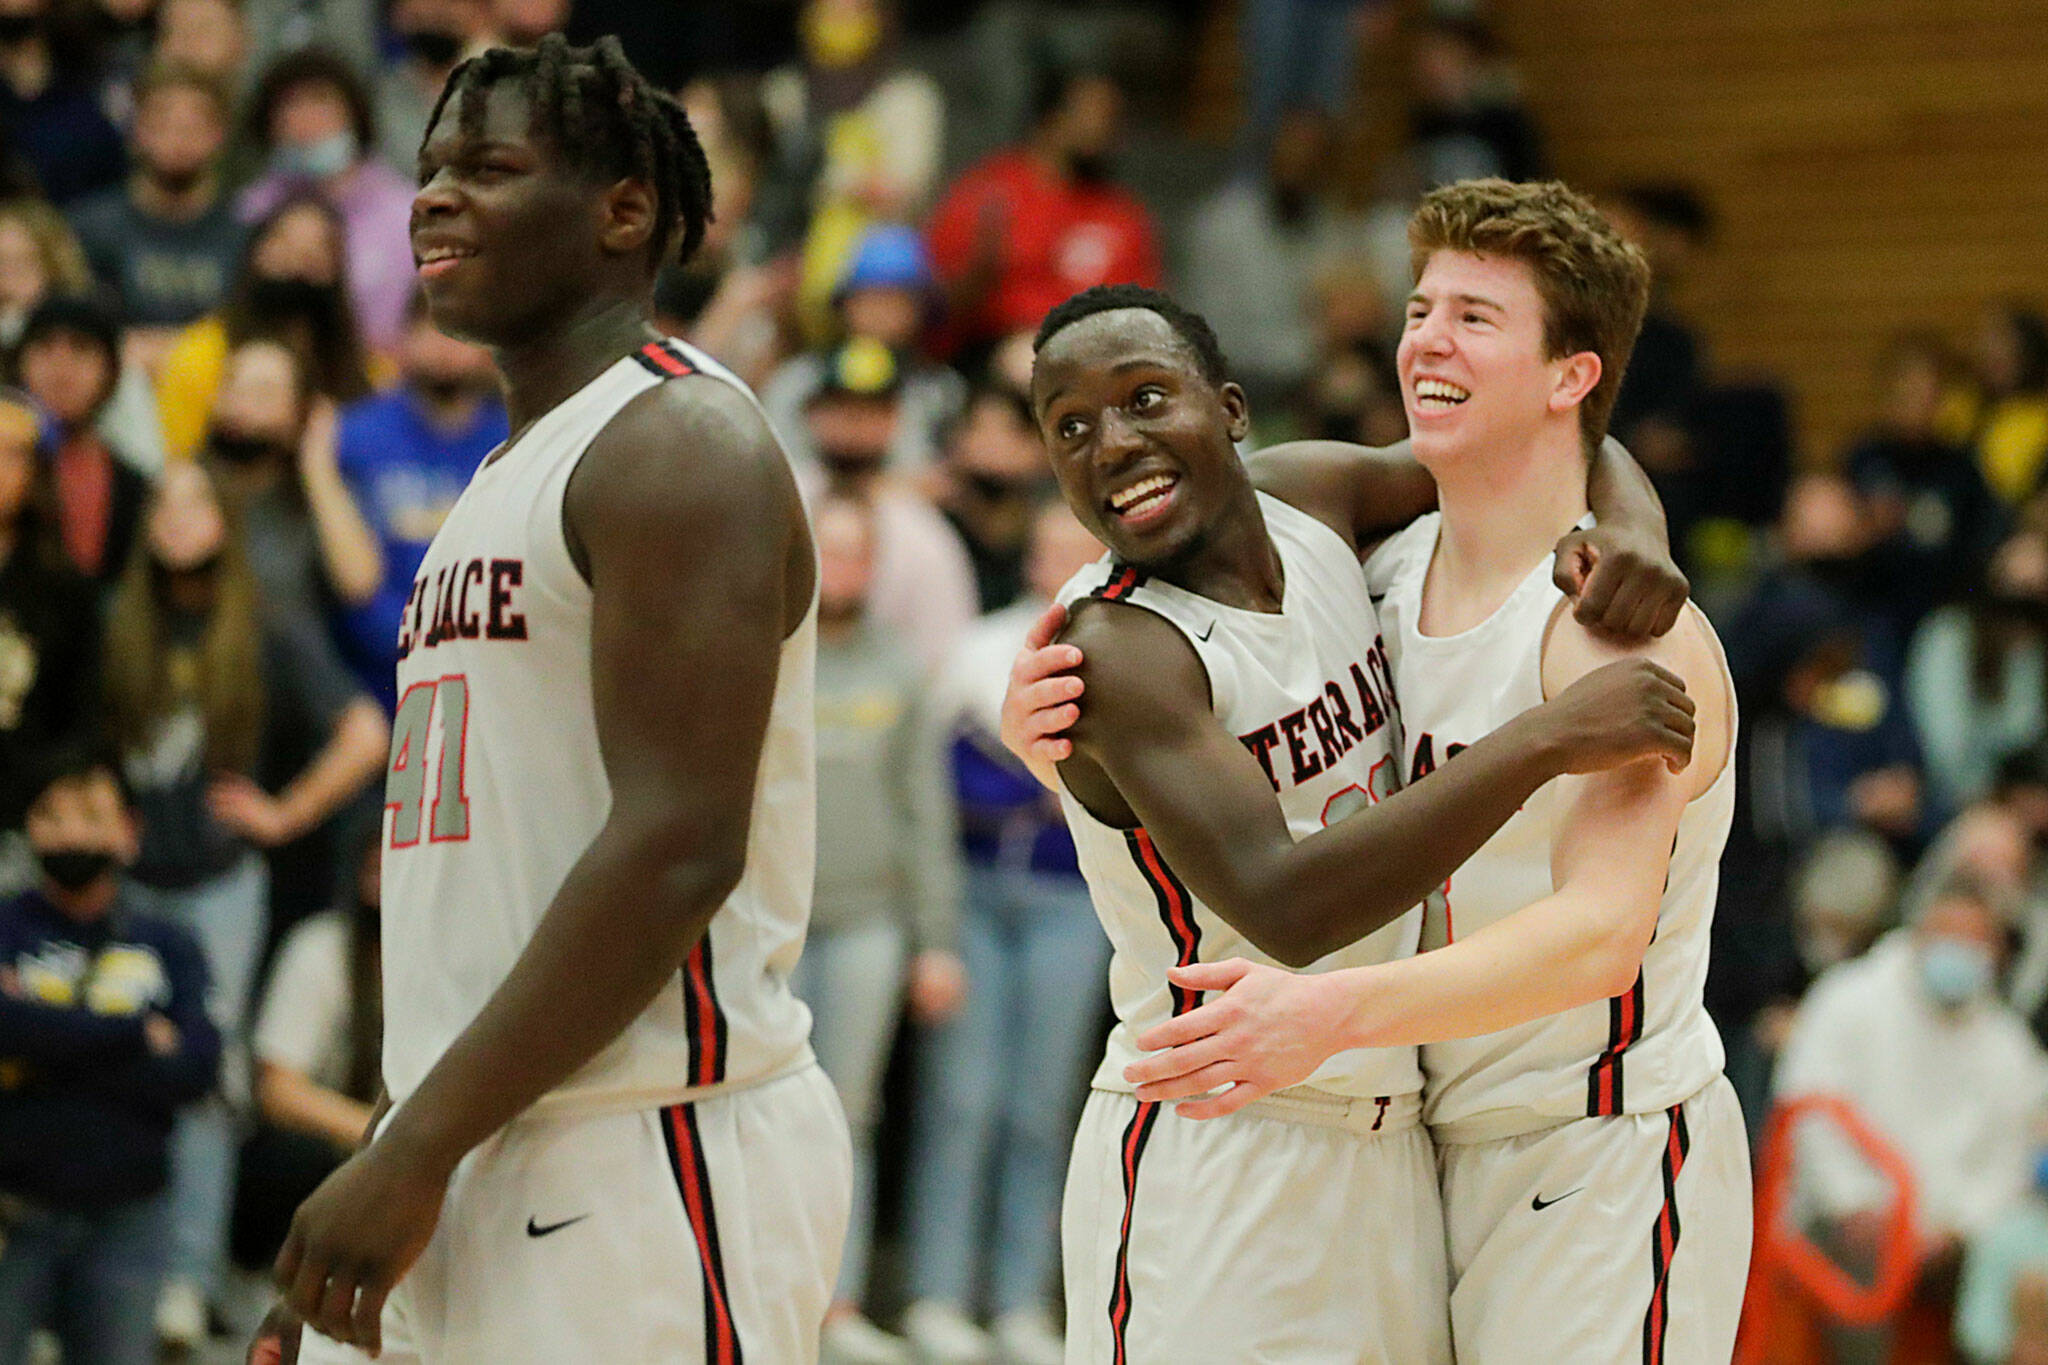 Led by its lockdown defense, Mountlake Terrace captured a district title and enters the state tournament having won 16 of its past 17 games. (Kevin Clark / The Herald )